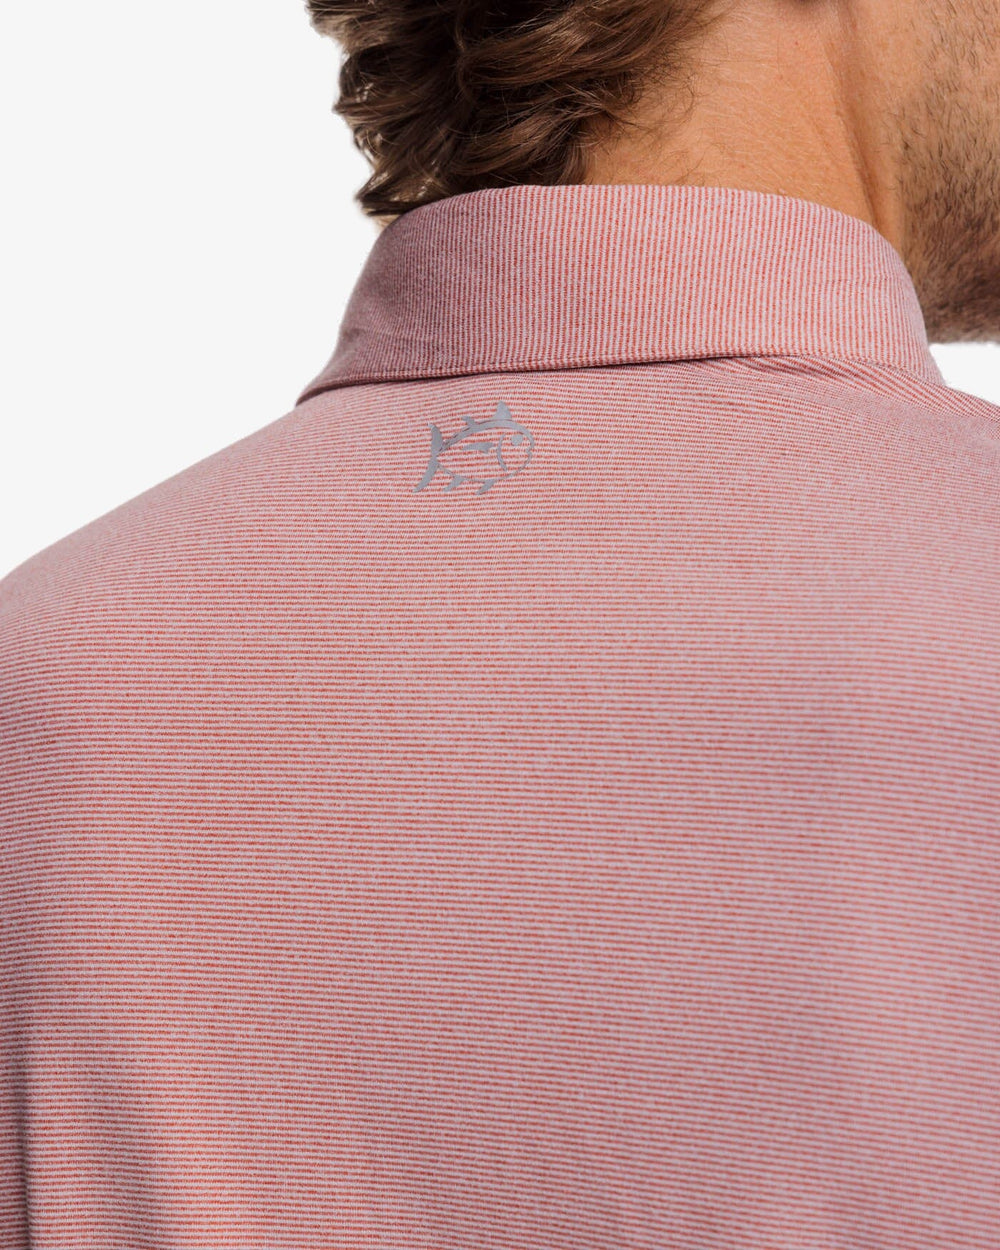 The yoke view of the Southern Tide Ryder Heather Ridgeway Stripe Long Sleeve Performance Polo by Southern Tide - Heather Dusty Coral